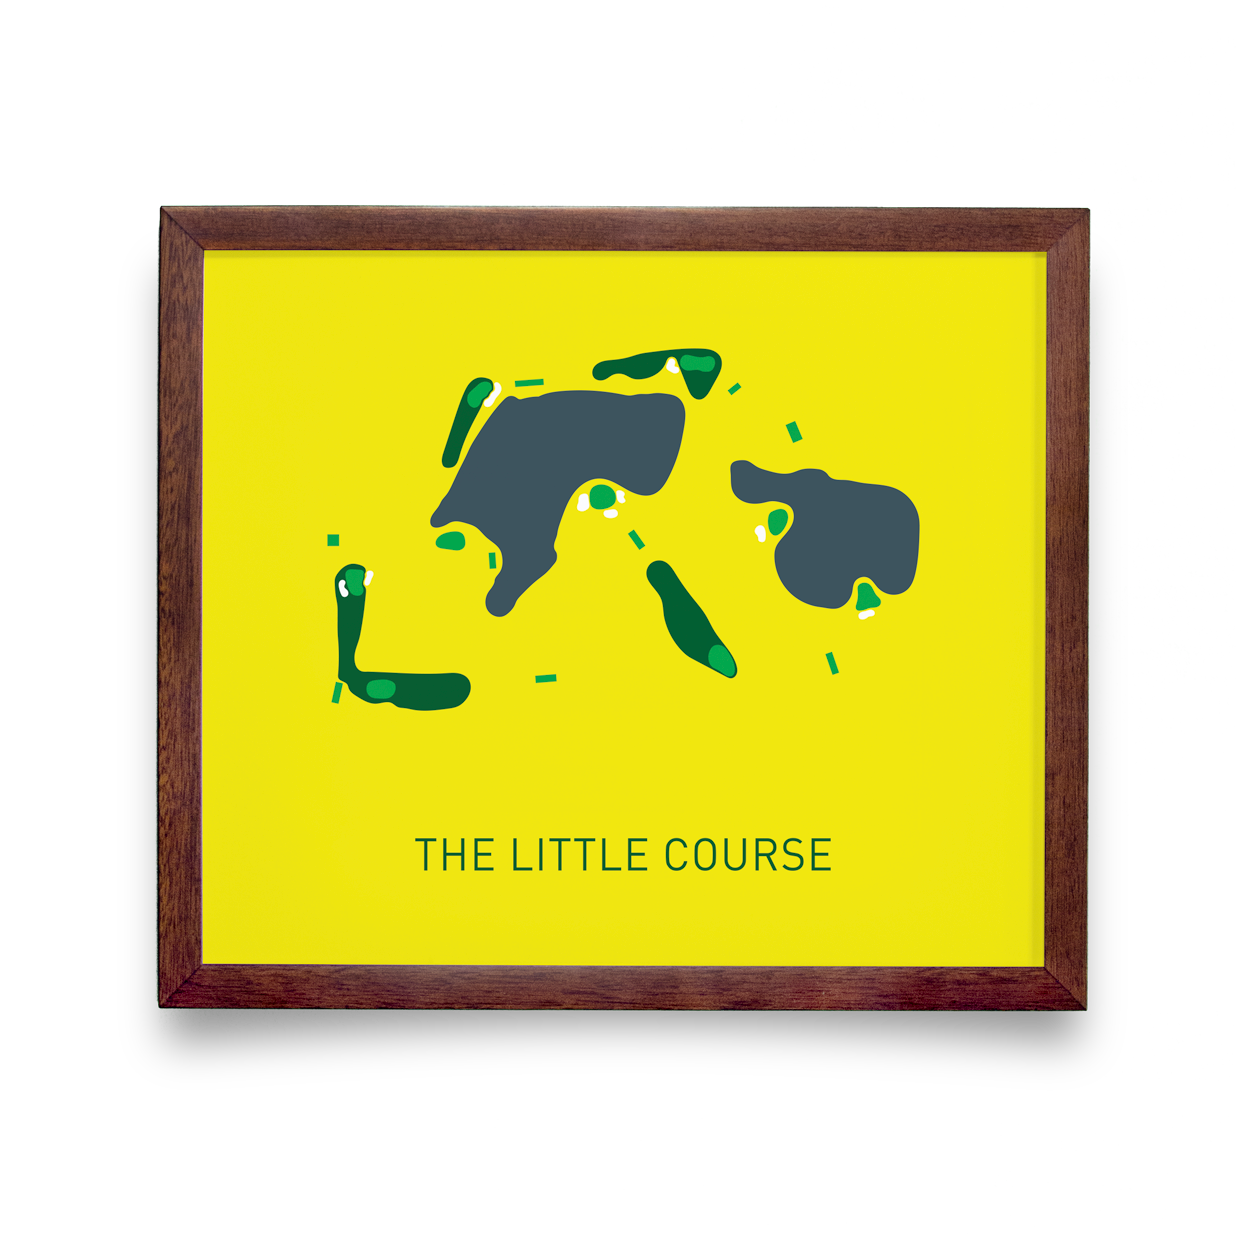 The Little Course